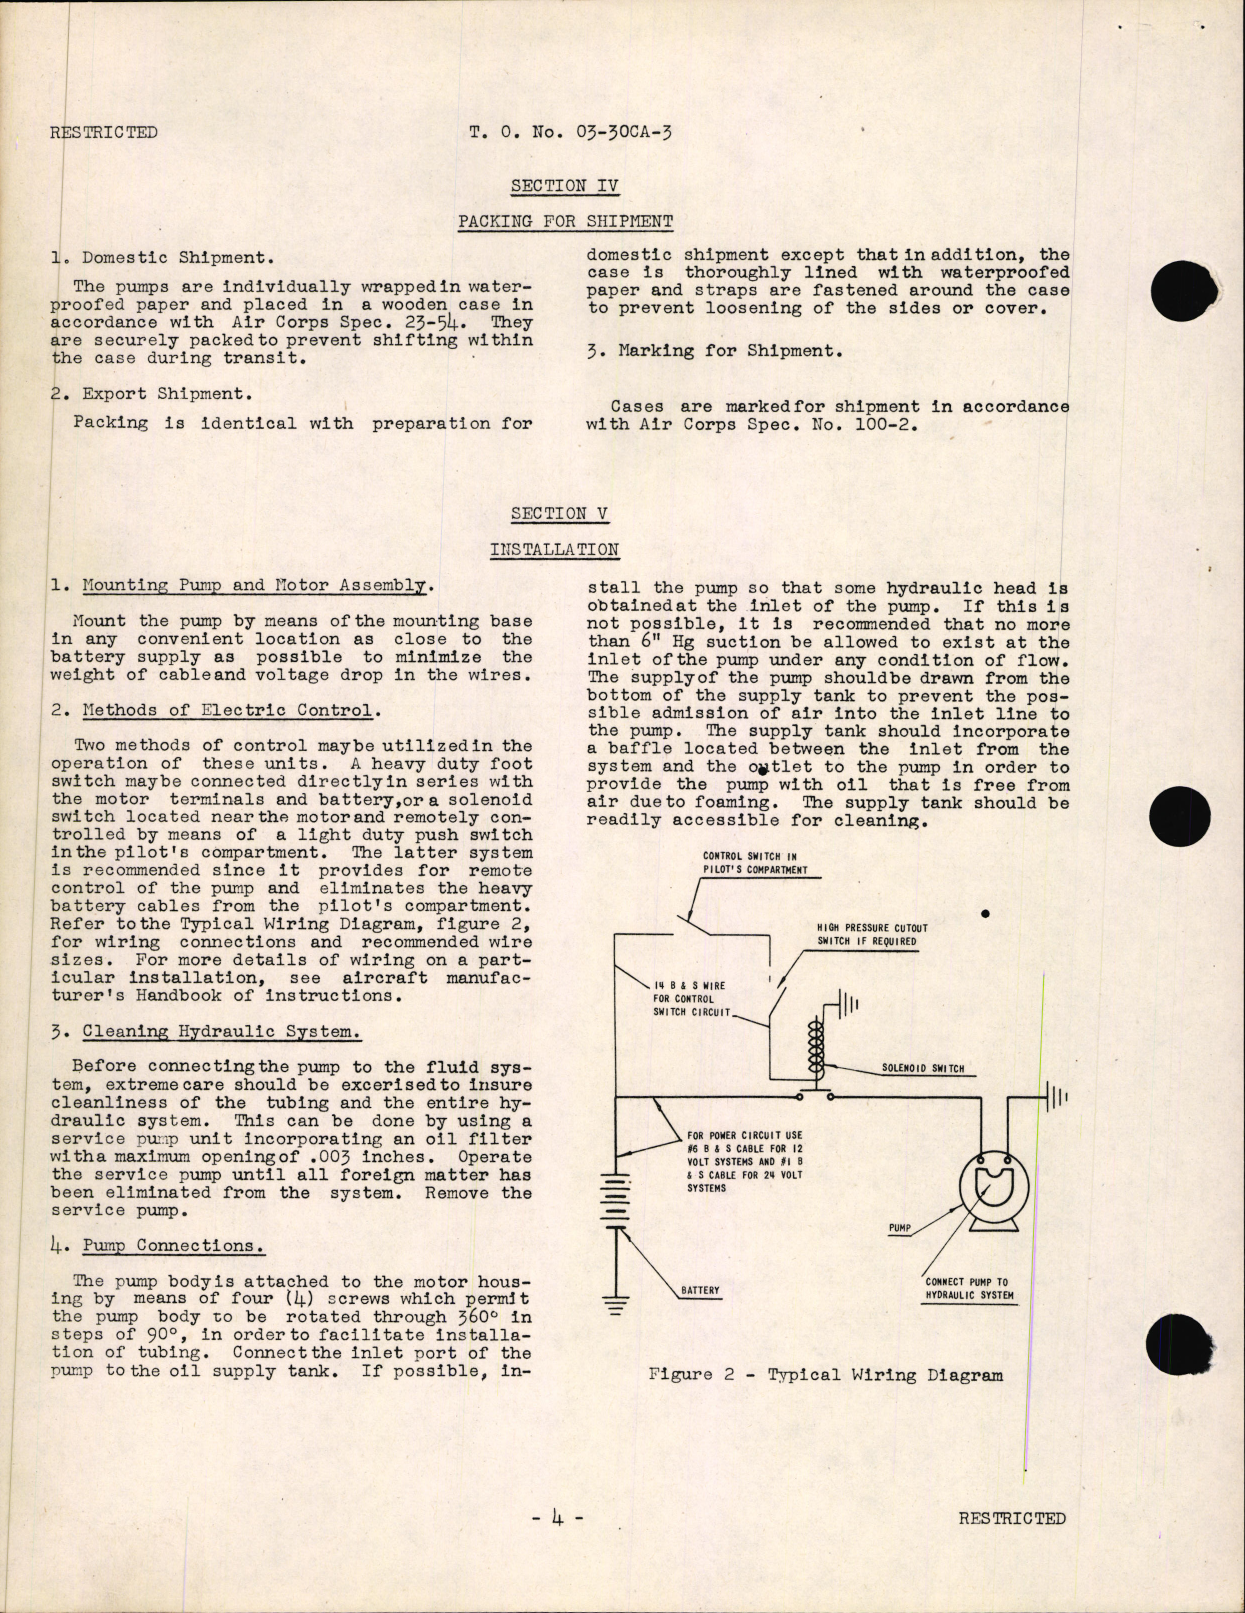 Sample page 6 from AirCorps Library document: Handbook of Instructions for Motor-Driven hydraulic Pump (Gear type)